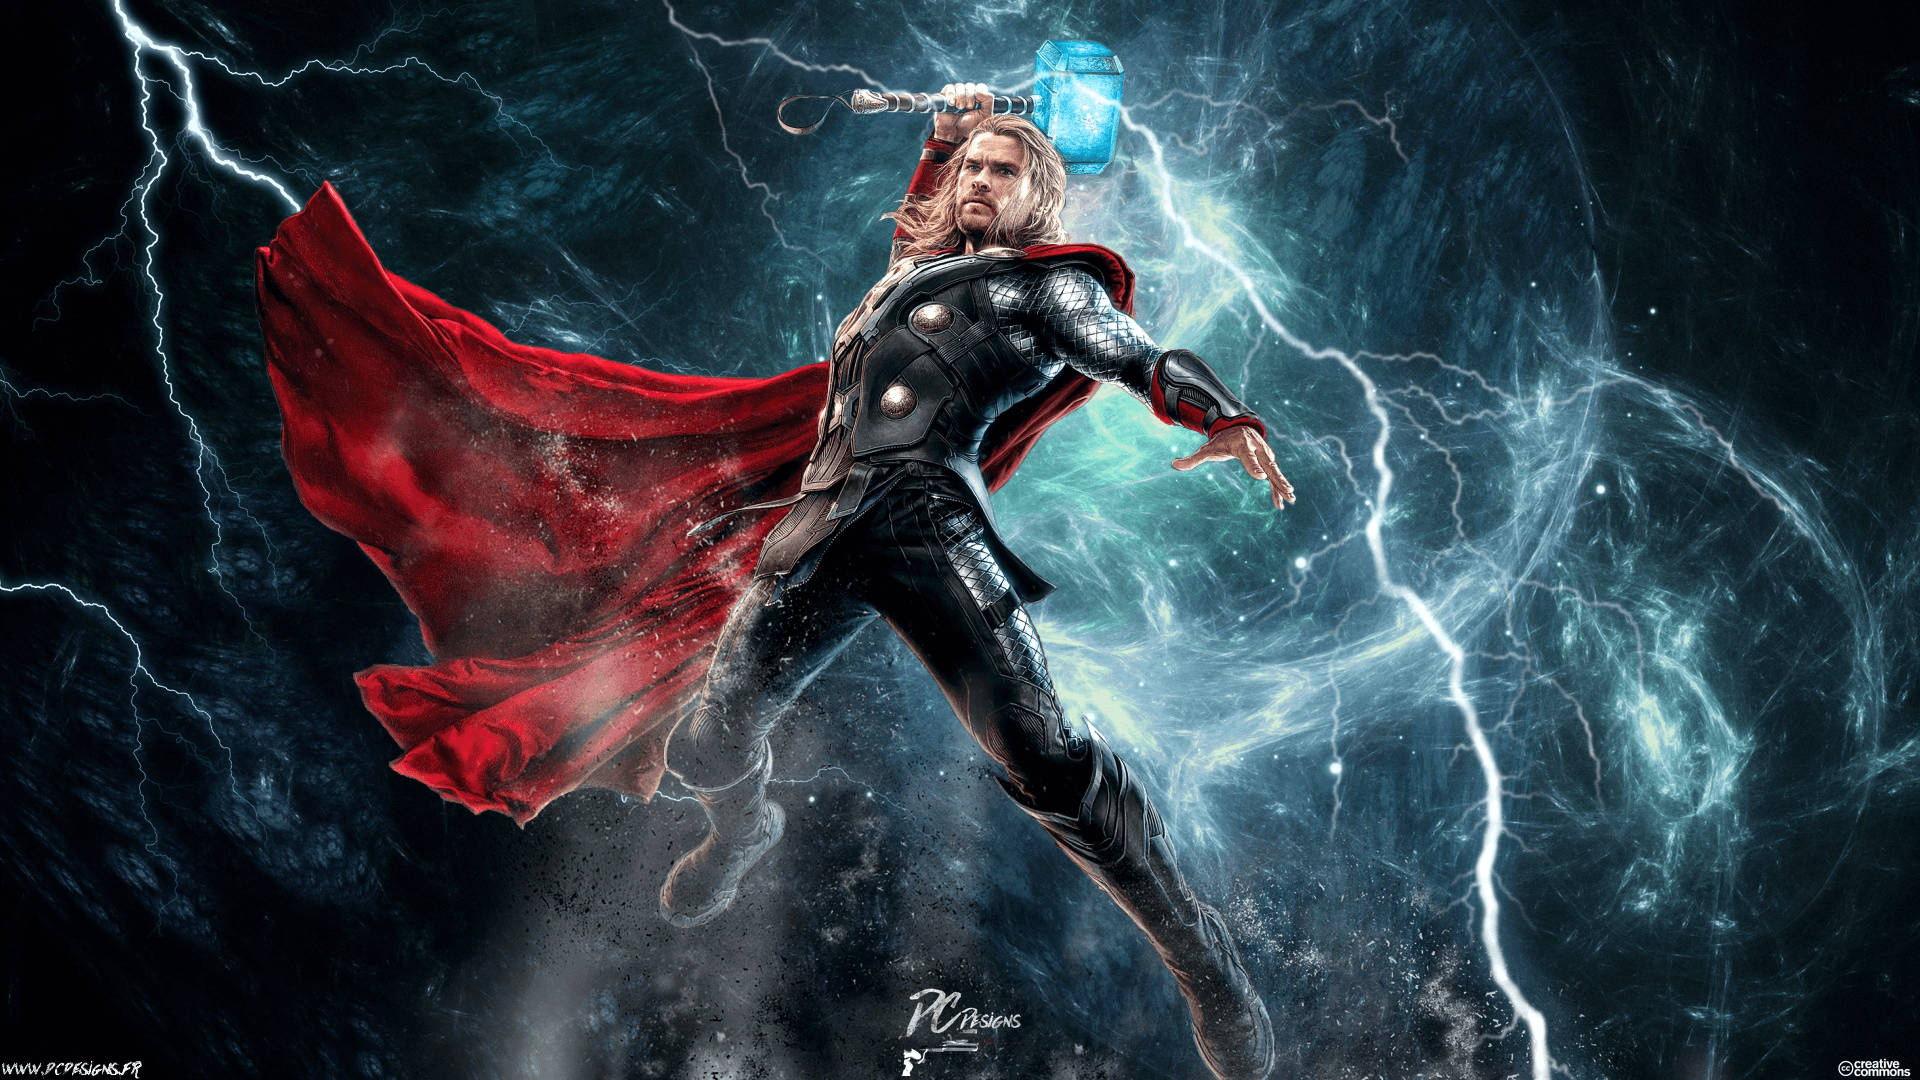 Thor standing with his might Mjolnir in Avengers: Age of Ultron Wallpaper